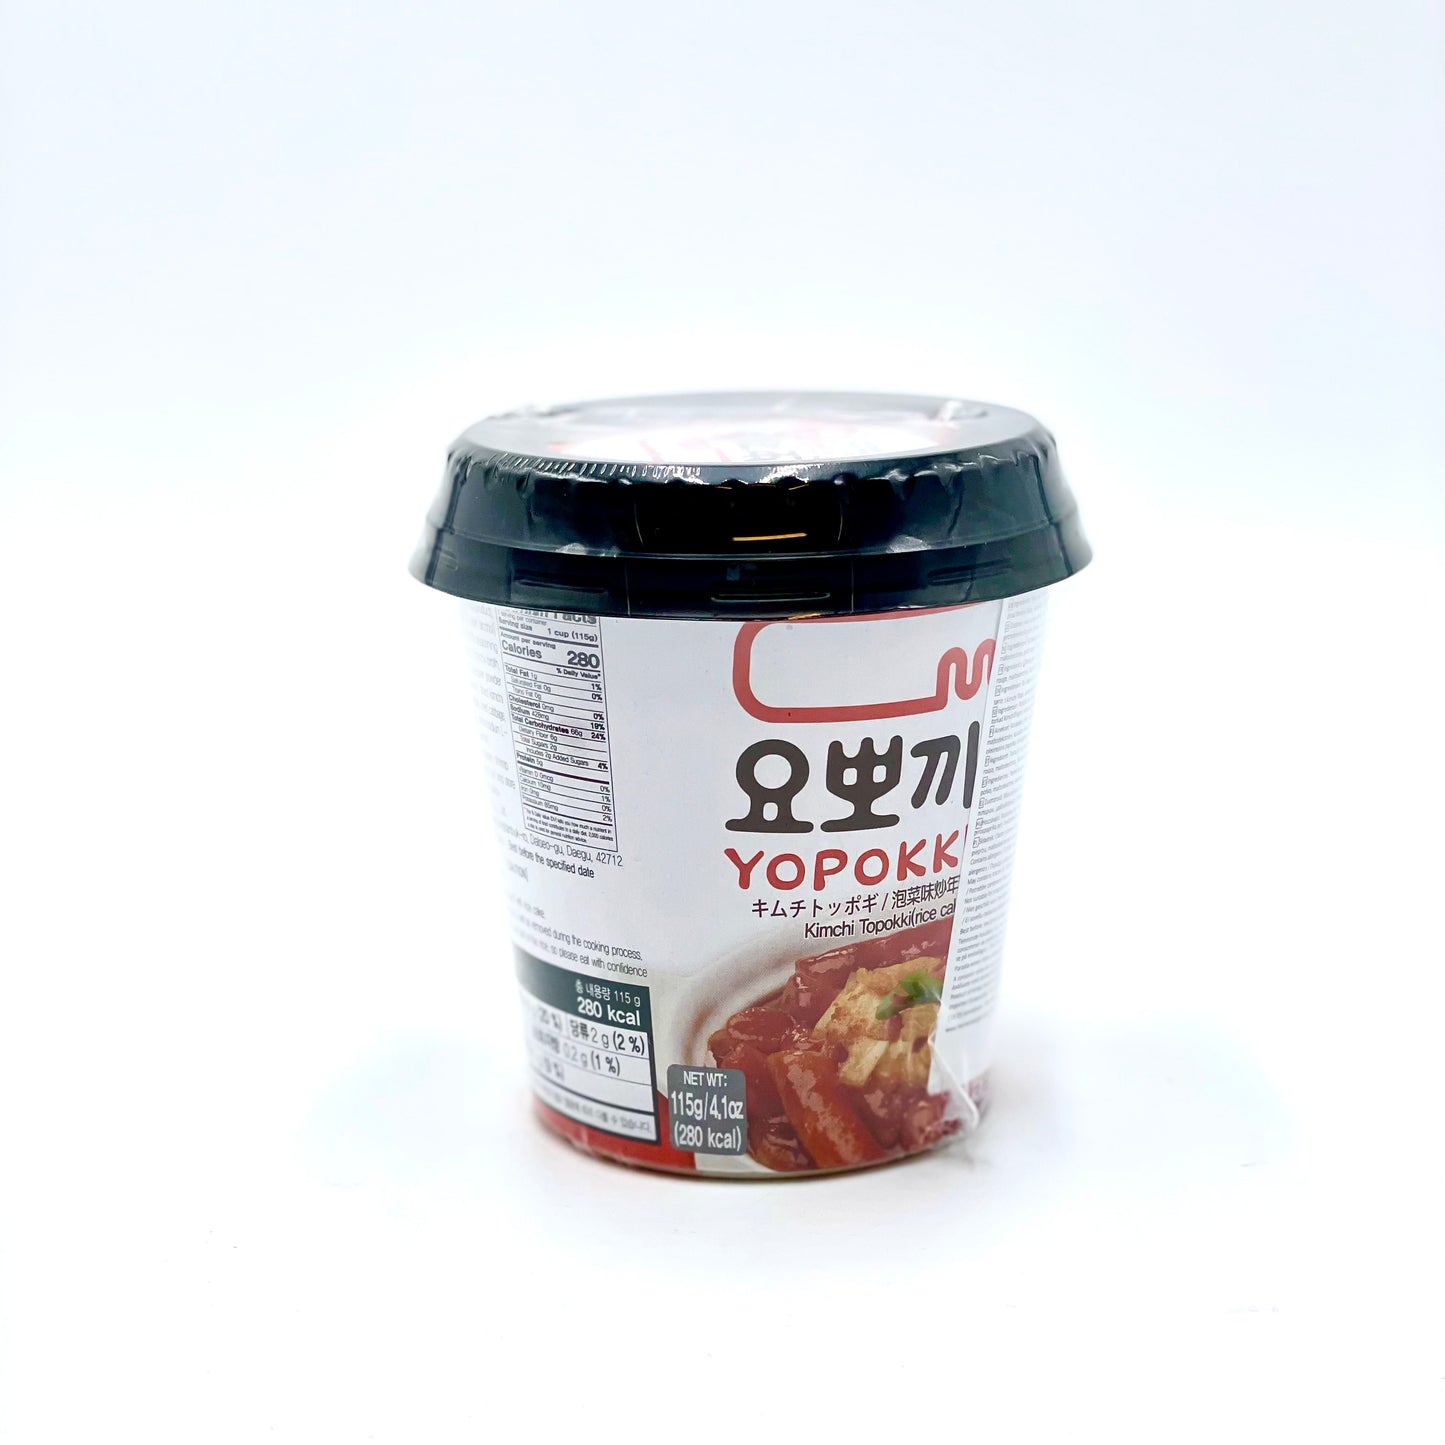 YoungPoong cup Yoppokki Kimchi 120g